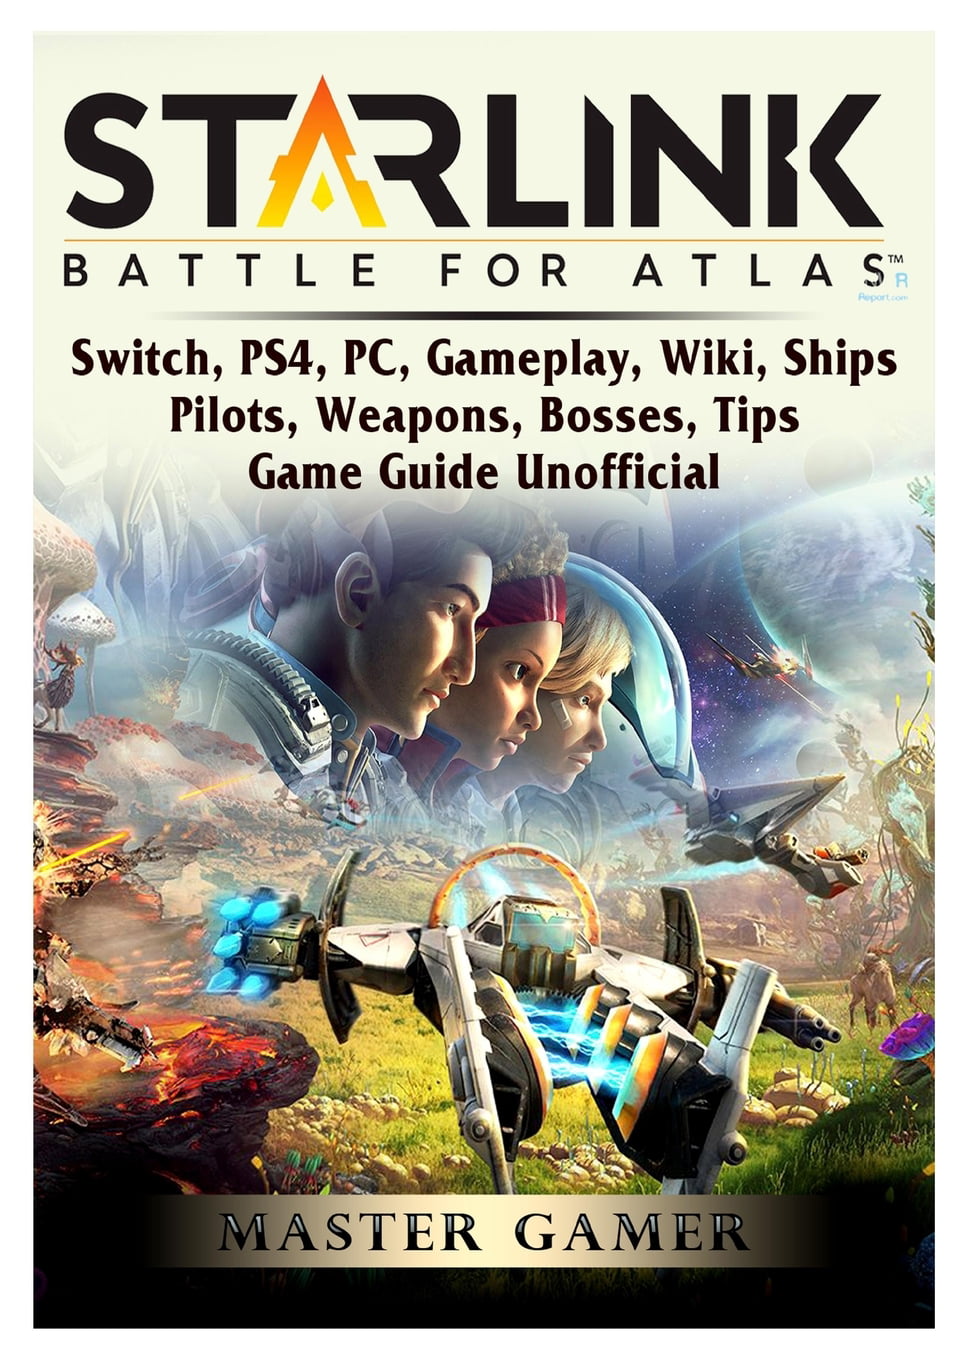 Starlink Battle For Atlas Switch Ps4 Pc Gameplay Wiki Ships Pilots Weapons Bosses Tips Game Guide Unofficial Paperback Walmart Com